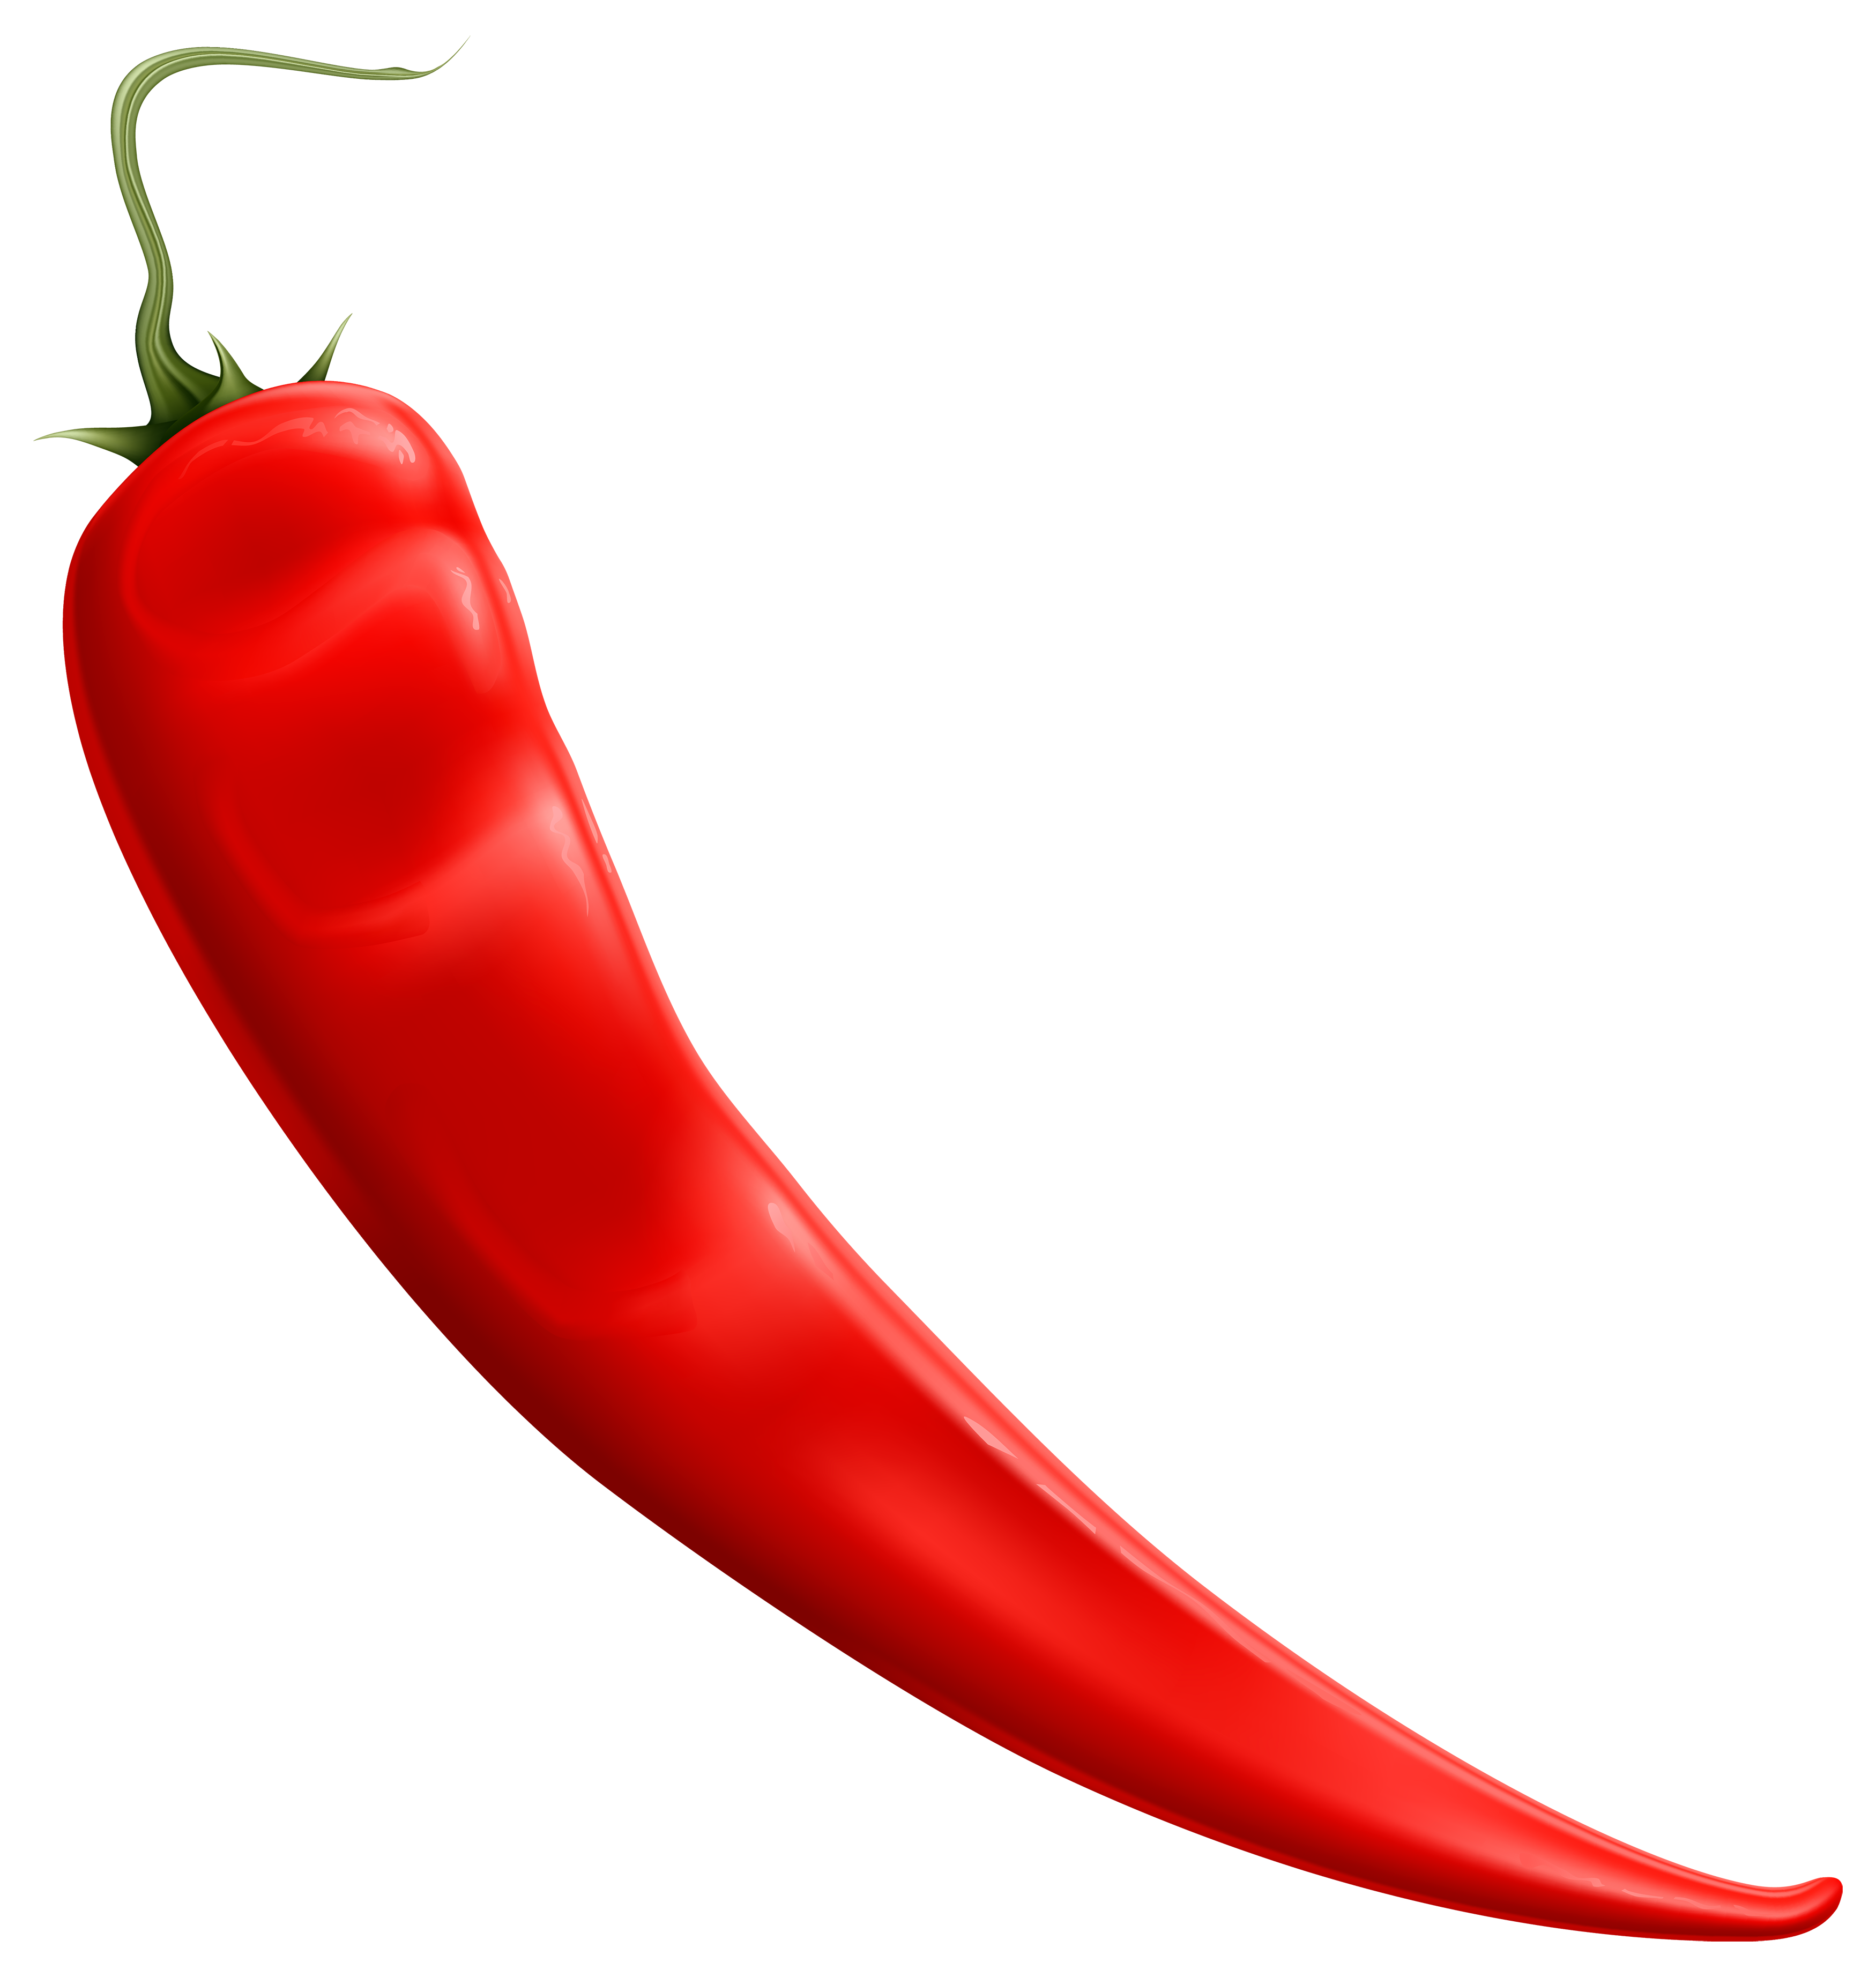 Red chili peppers clipart - ClipartFox